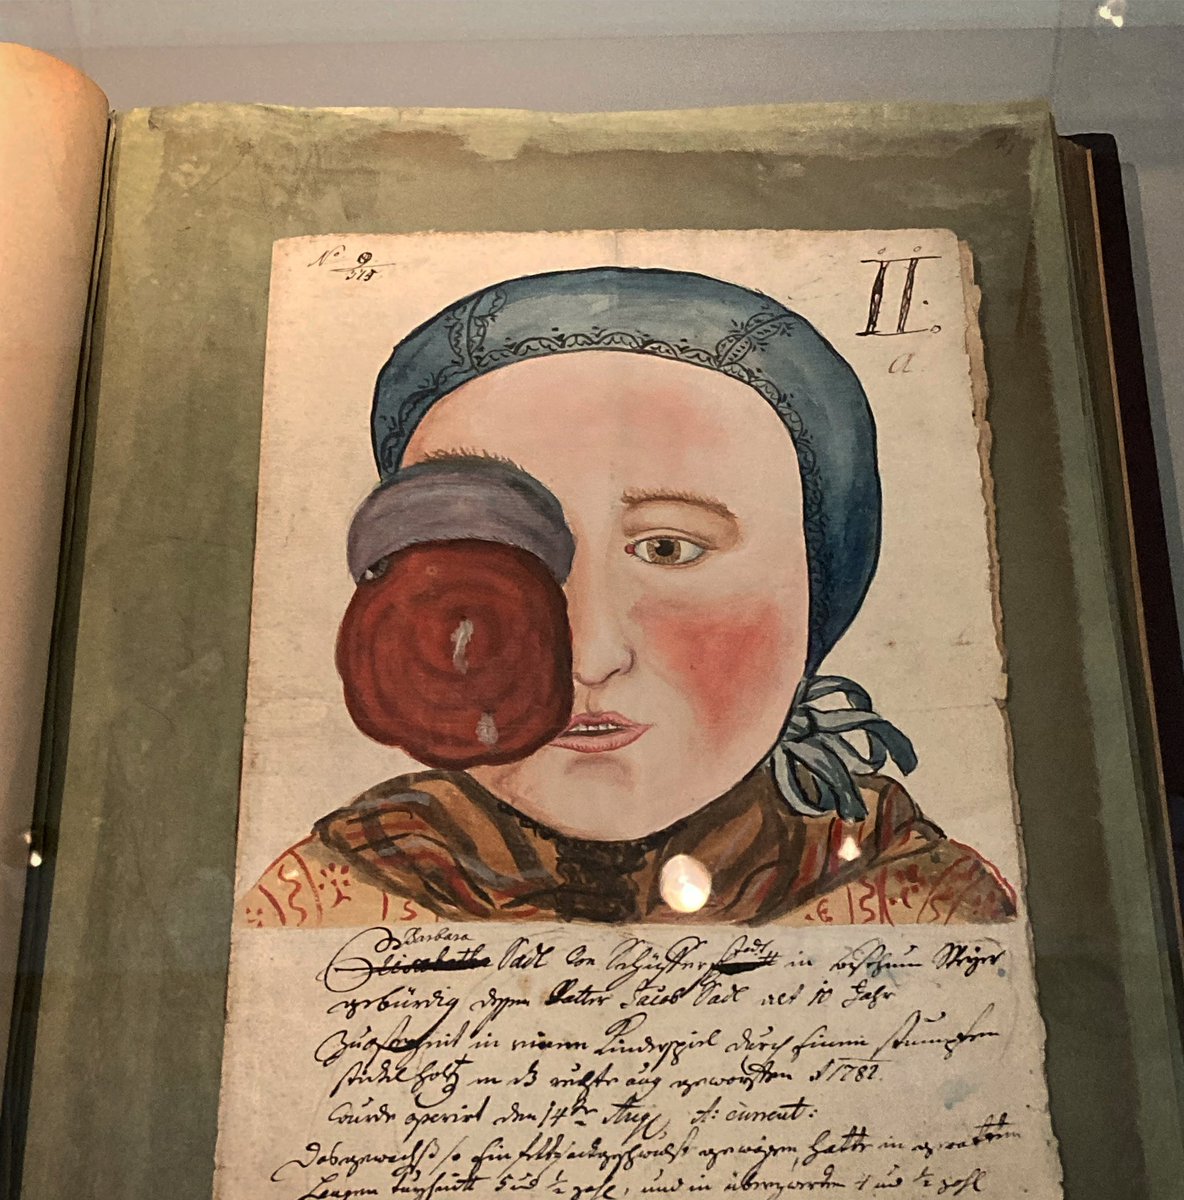 An album of illustrations of eye diseases, used for teaching in the world’s first university eye clinic founded in Vienna in 1812